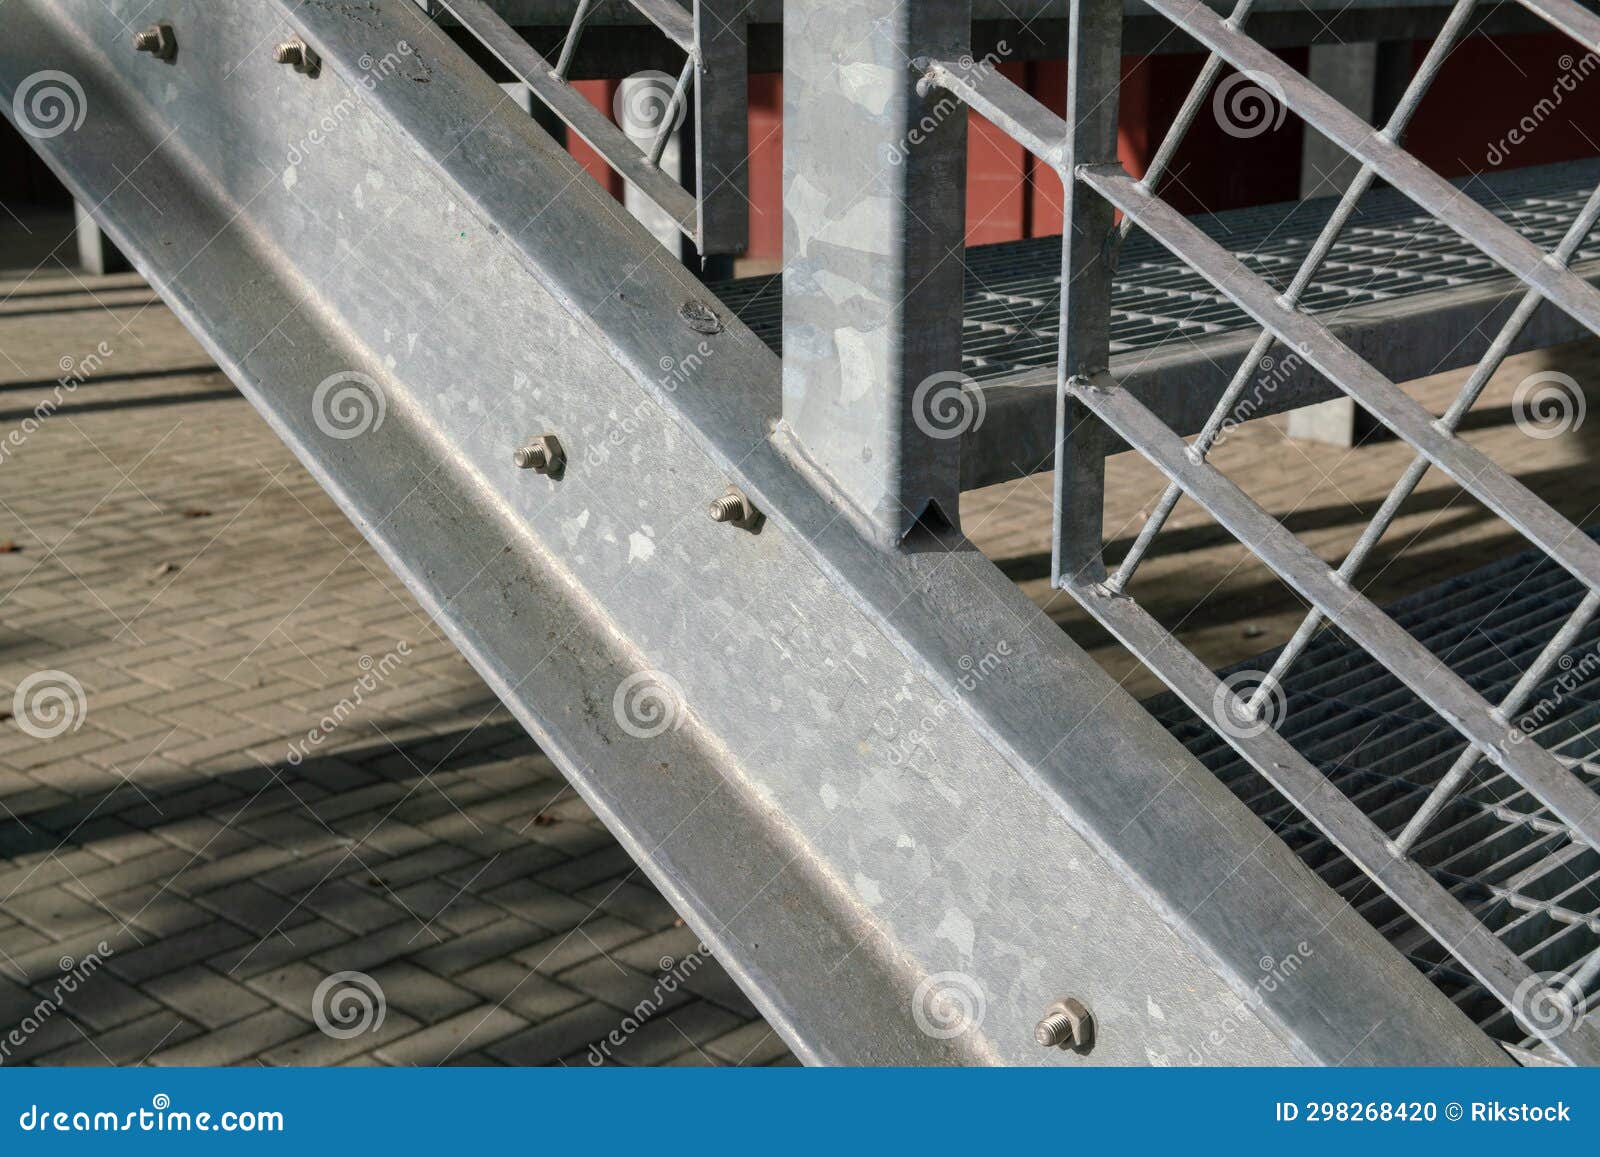 Fire Escape Staircase, Pedestrian Passage for Emergency Exit. Particular  Structure in Galvanized Stainless Steel, with Detail of Stock Photo - Image  of structure, grill: 298268420